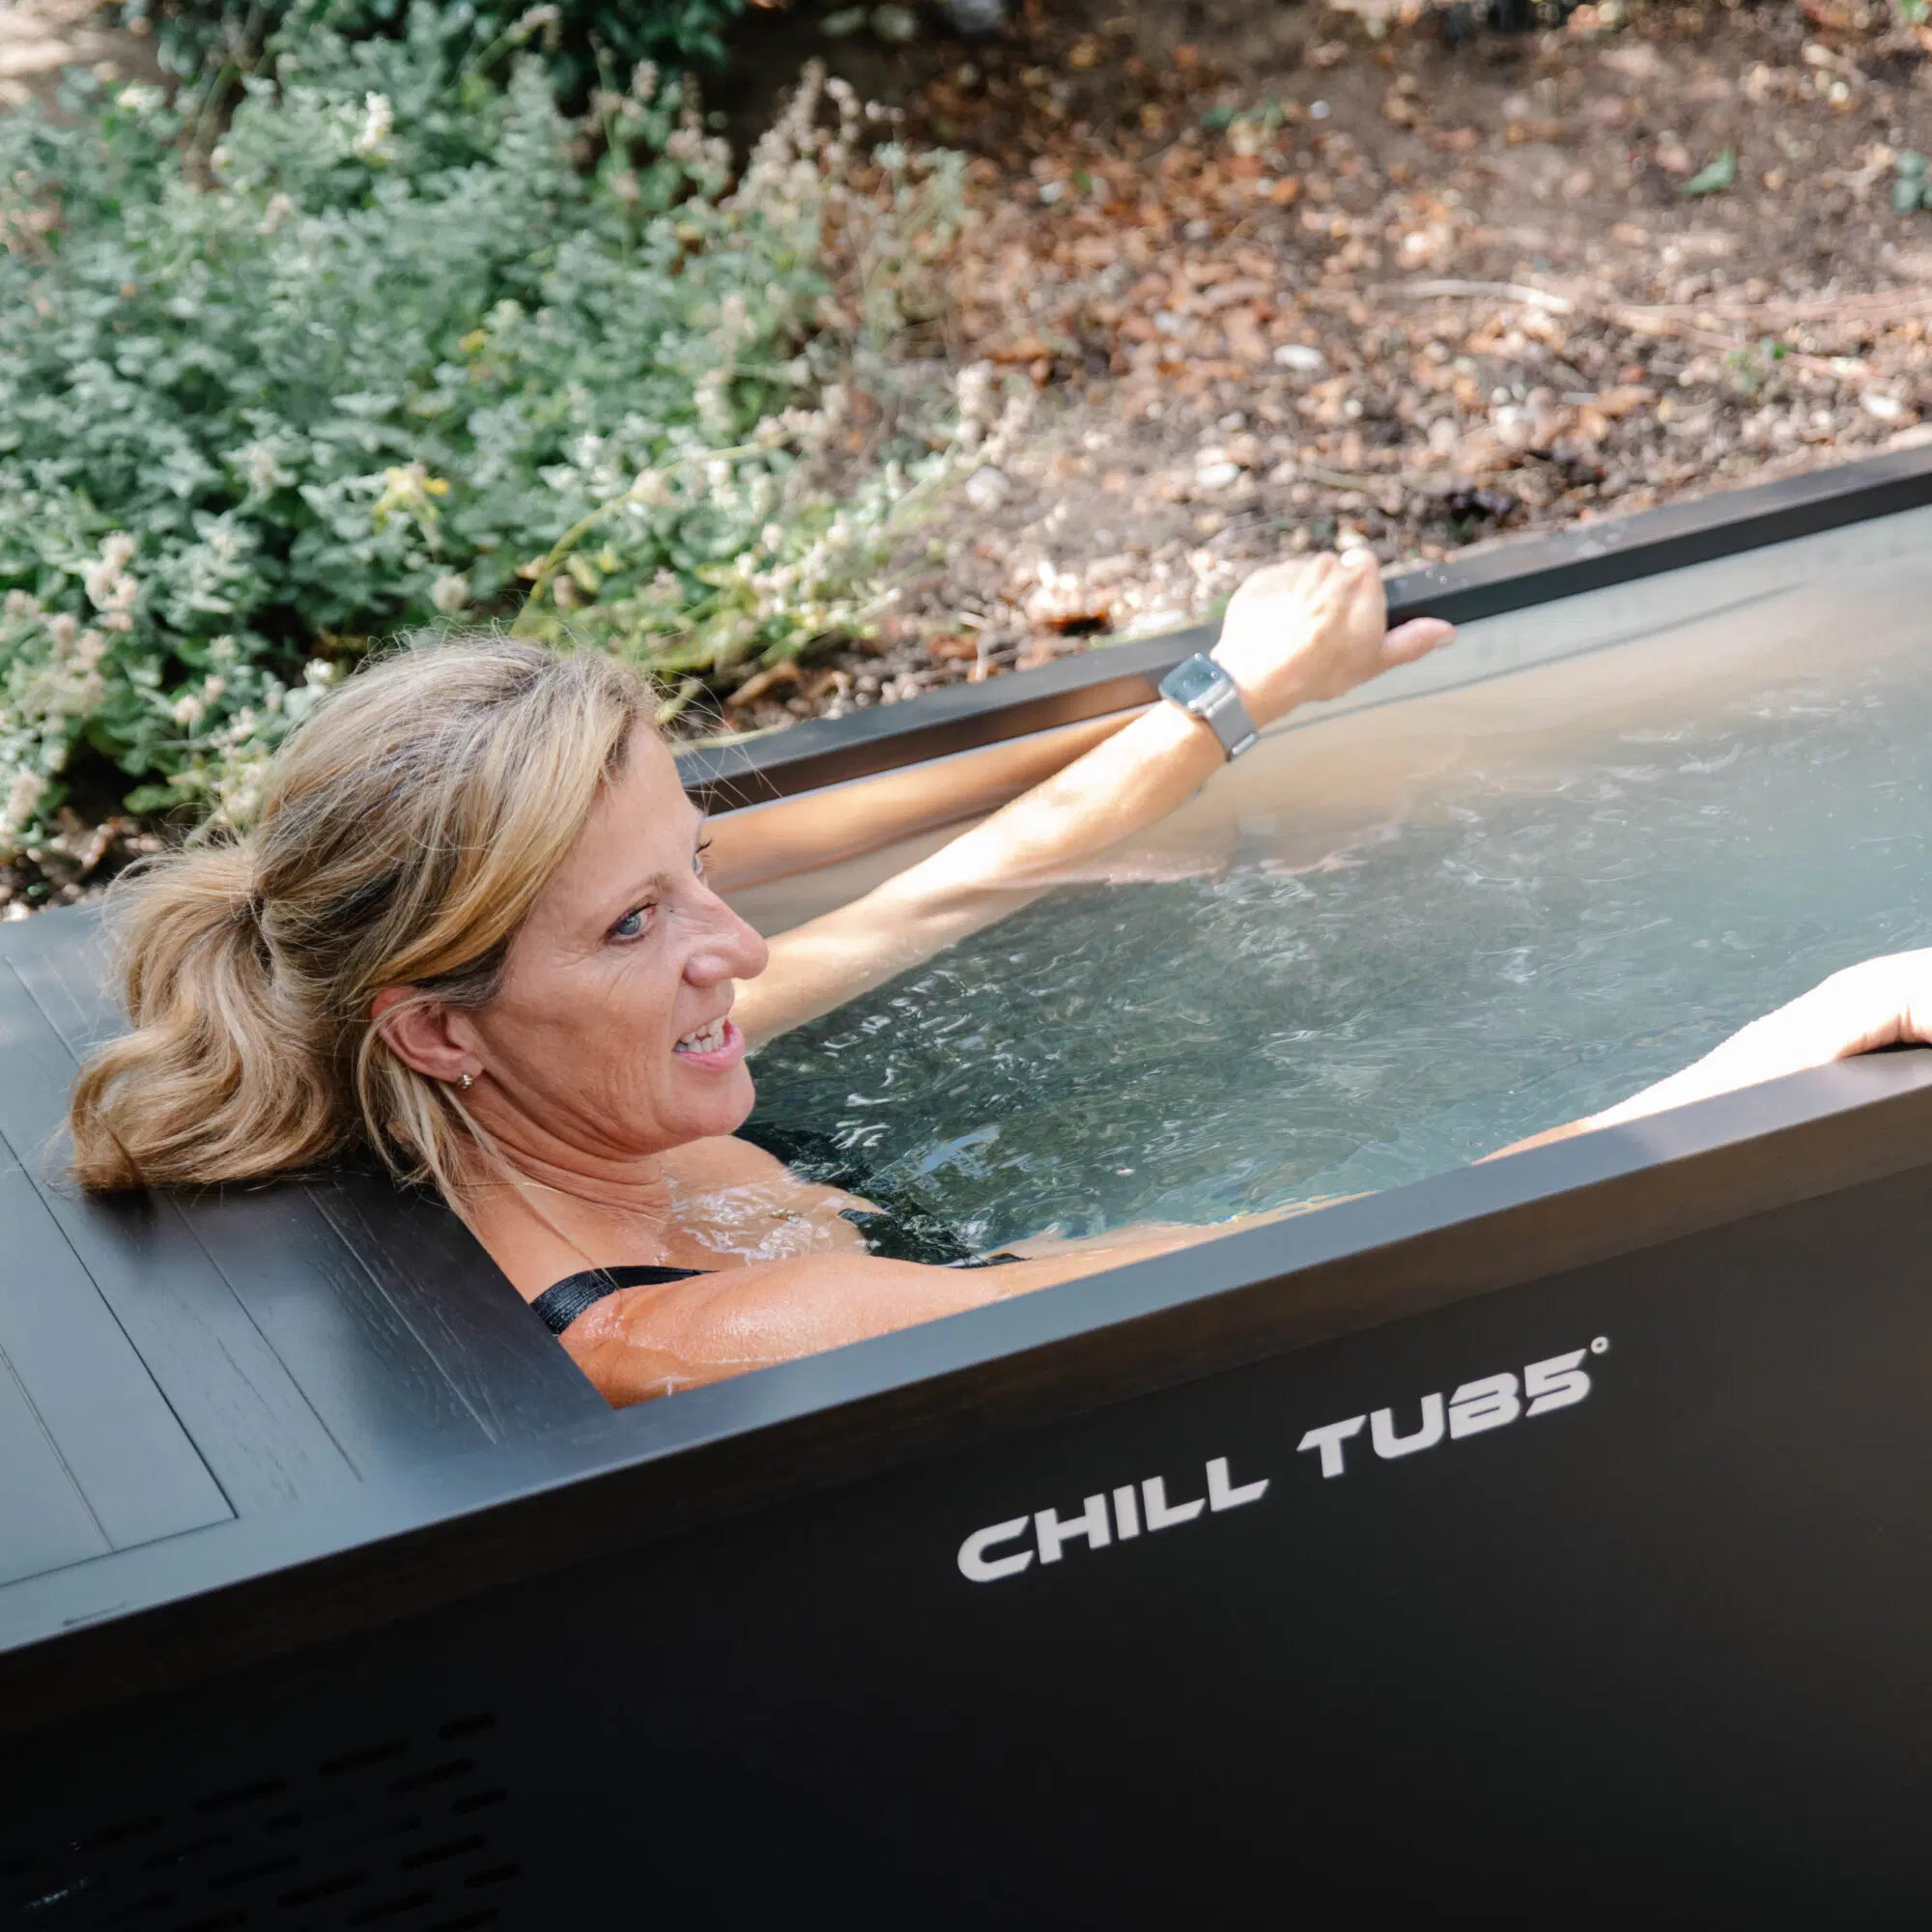 Ice Bath | Chill Tub - Complete with chiller, filtration, Ozone and temperature display